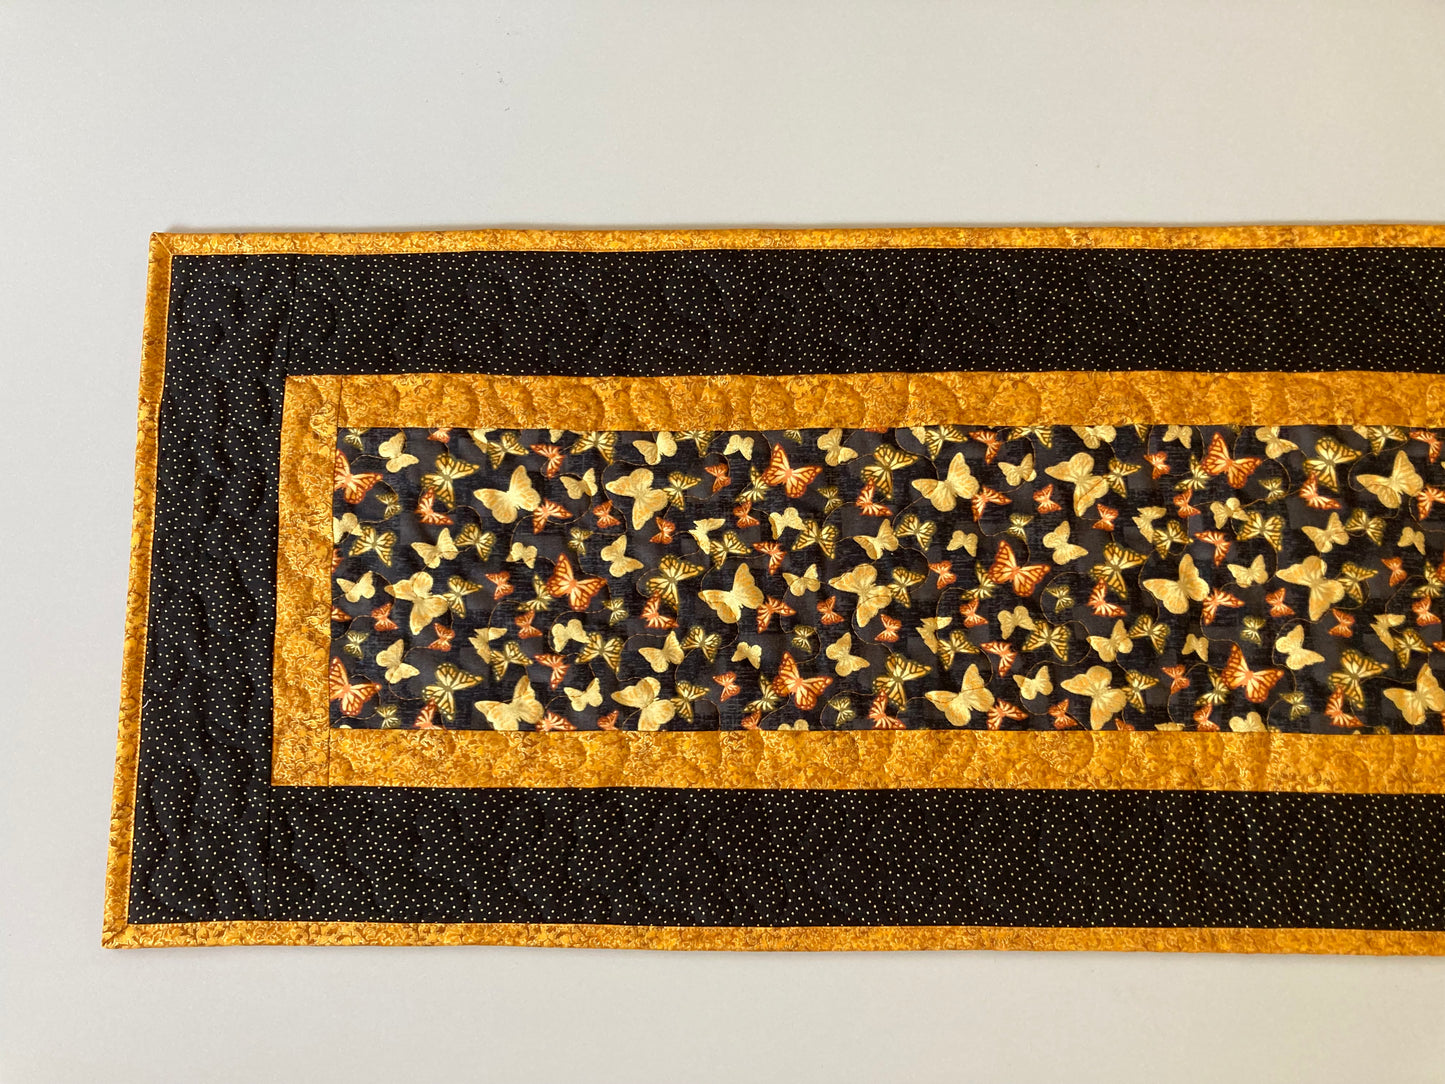 Butterfly Quilted Dining Coffee Table Runner, Farmhouse Nature Reversible 13x48" Gold Orange Black, Garden Butterflies Country Nature